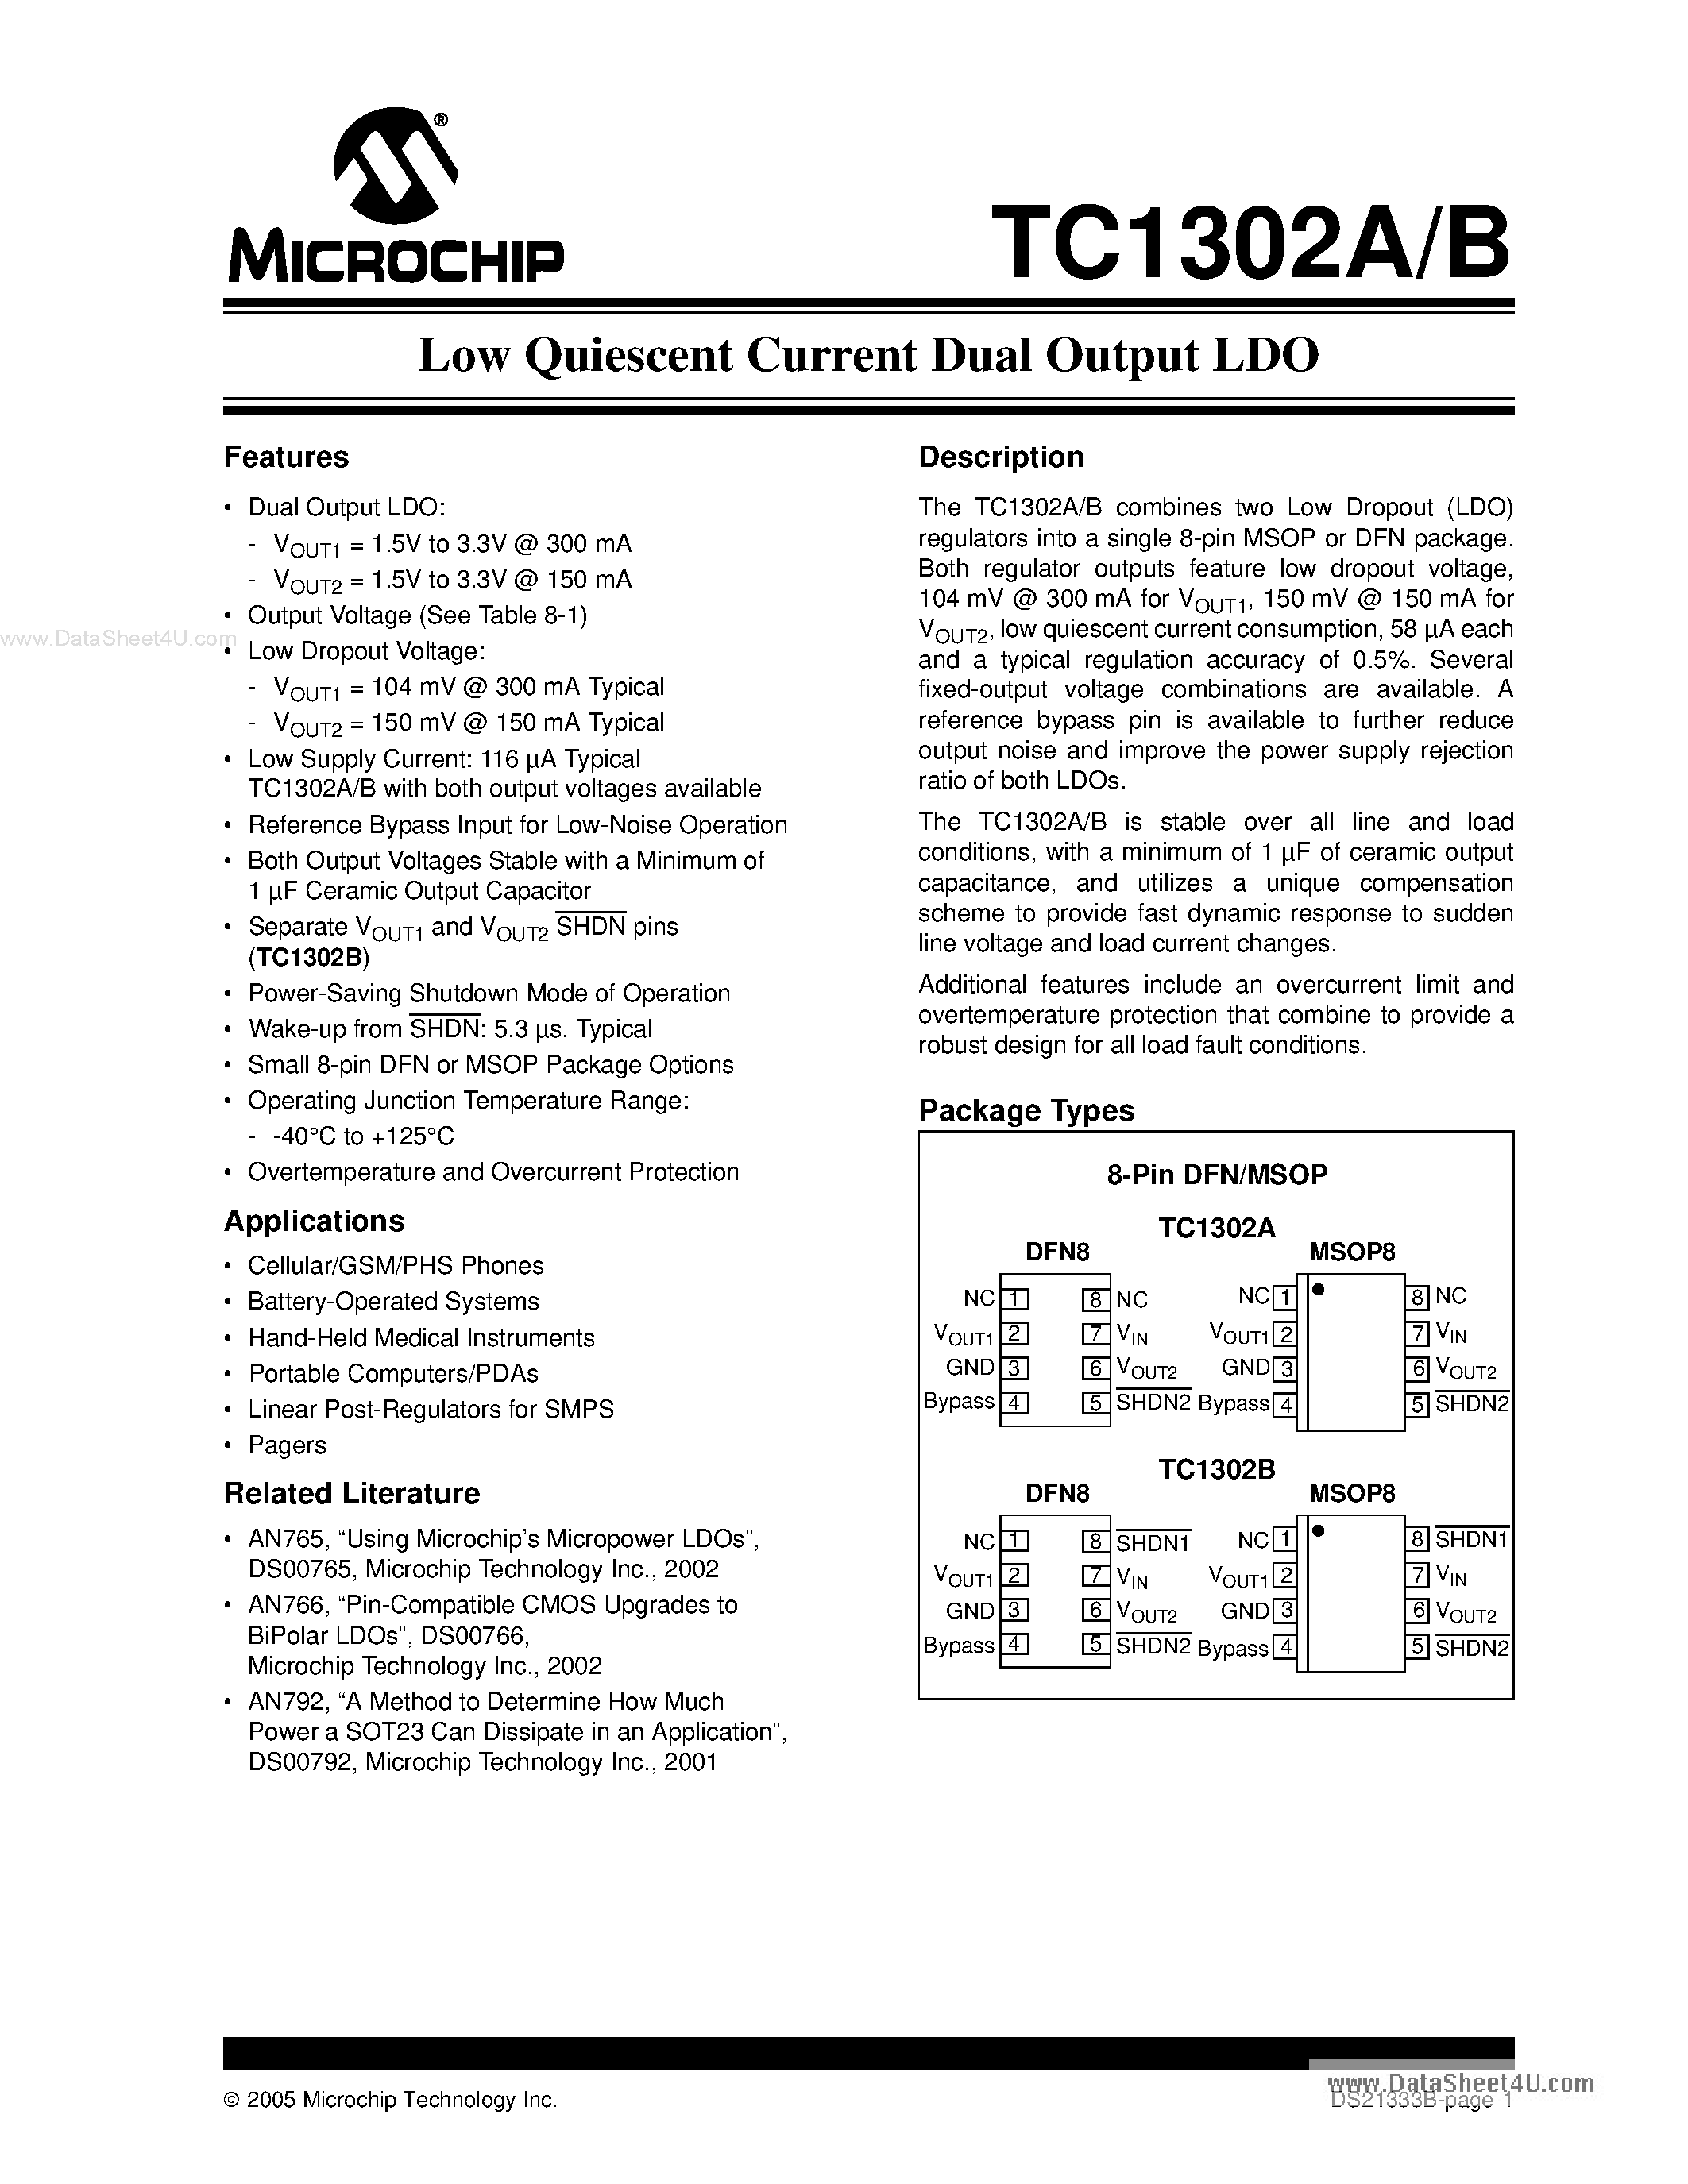 Datasheet TC1302A - LOW QUIESCENT CURRENT DUAL OUTPUT LDO page 1